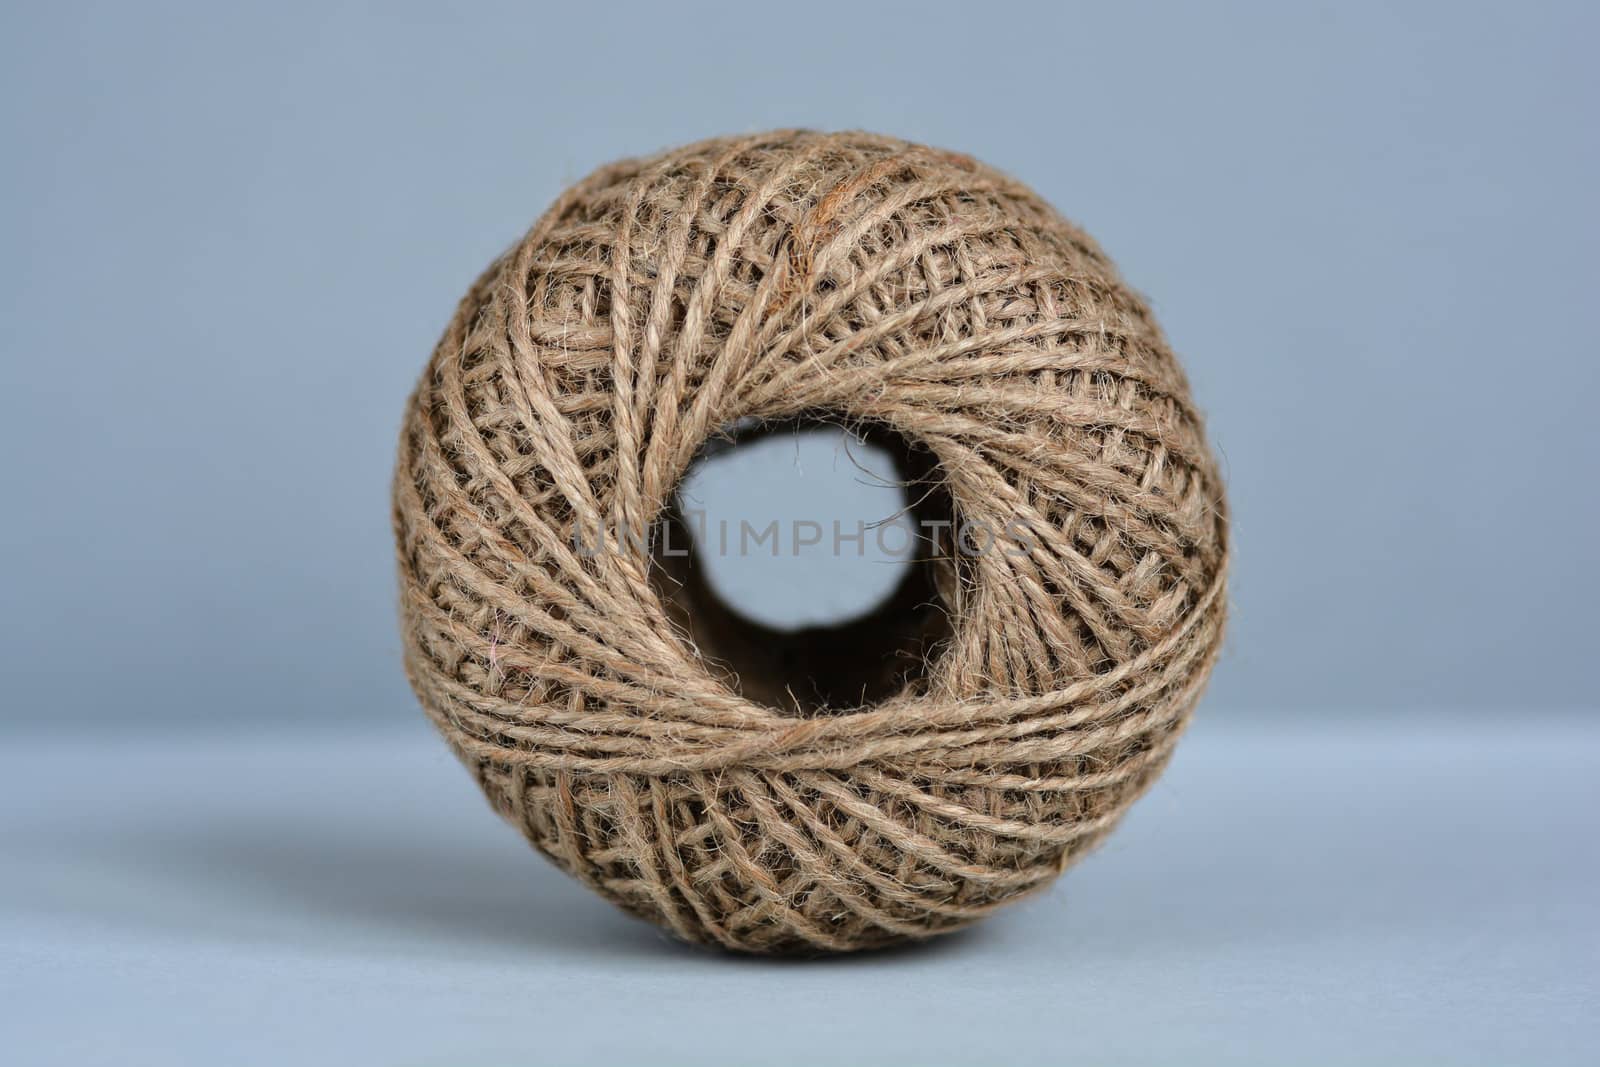 Ball of rope by nahhan